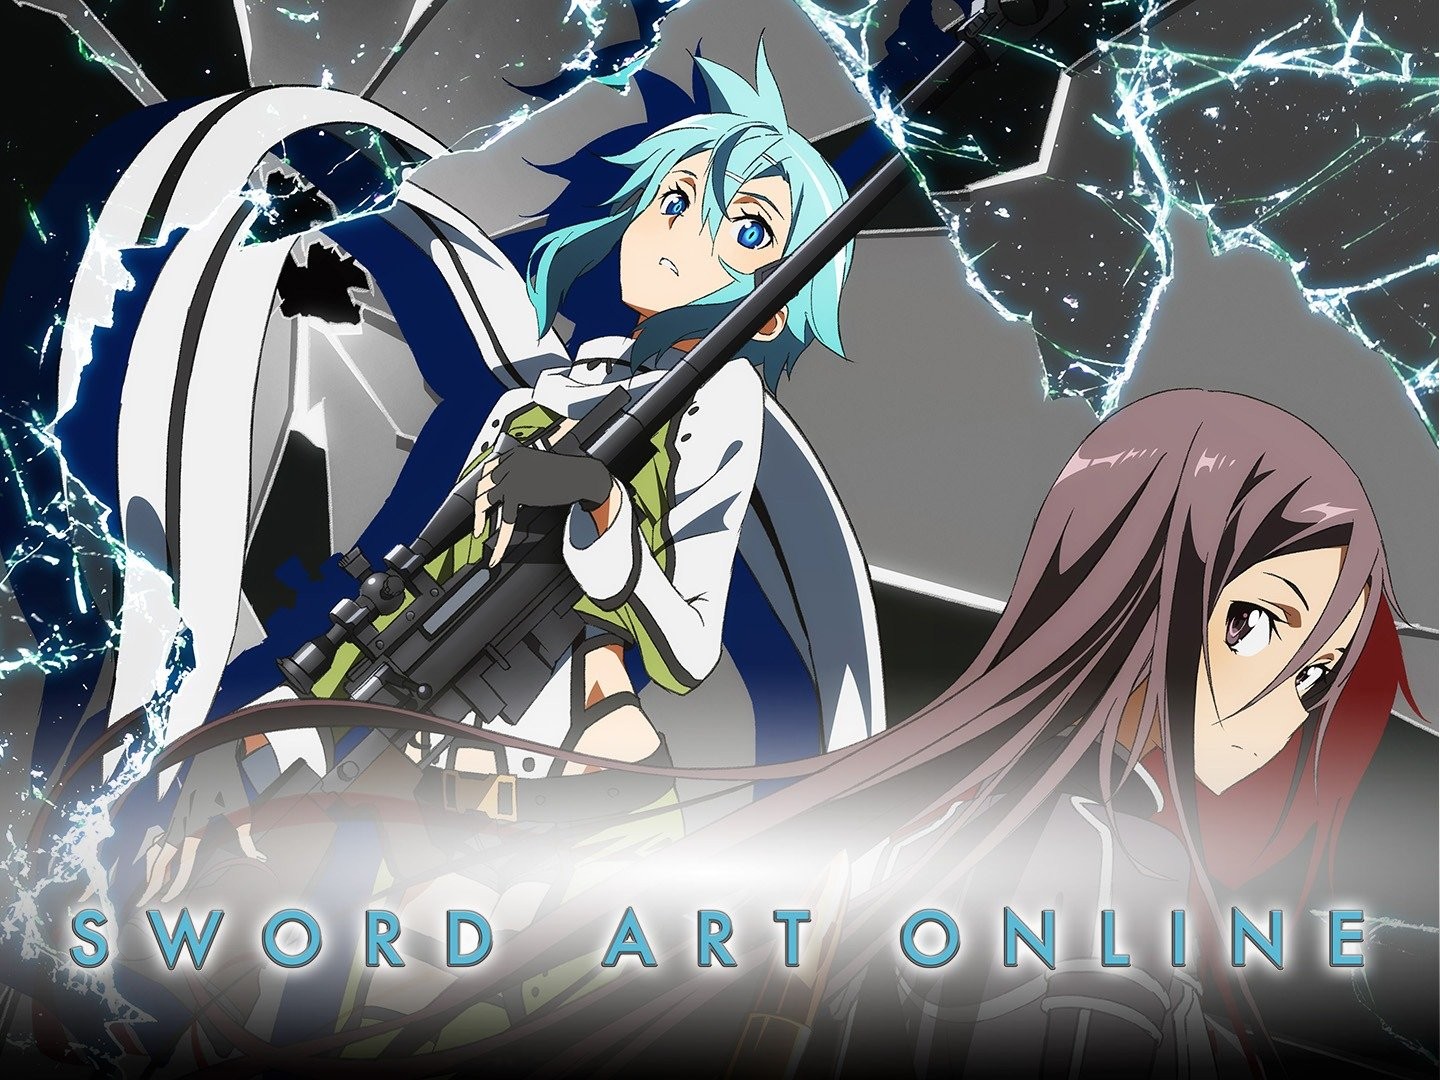 Sword Art Online Full Season Review – Anime Reviews and Lots of